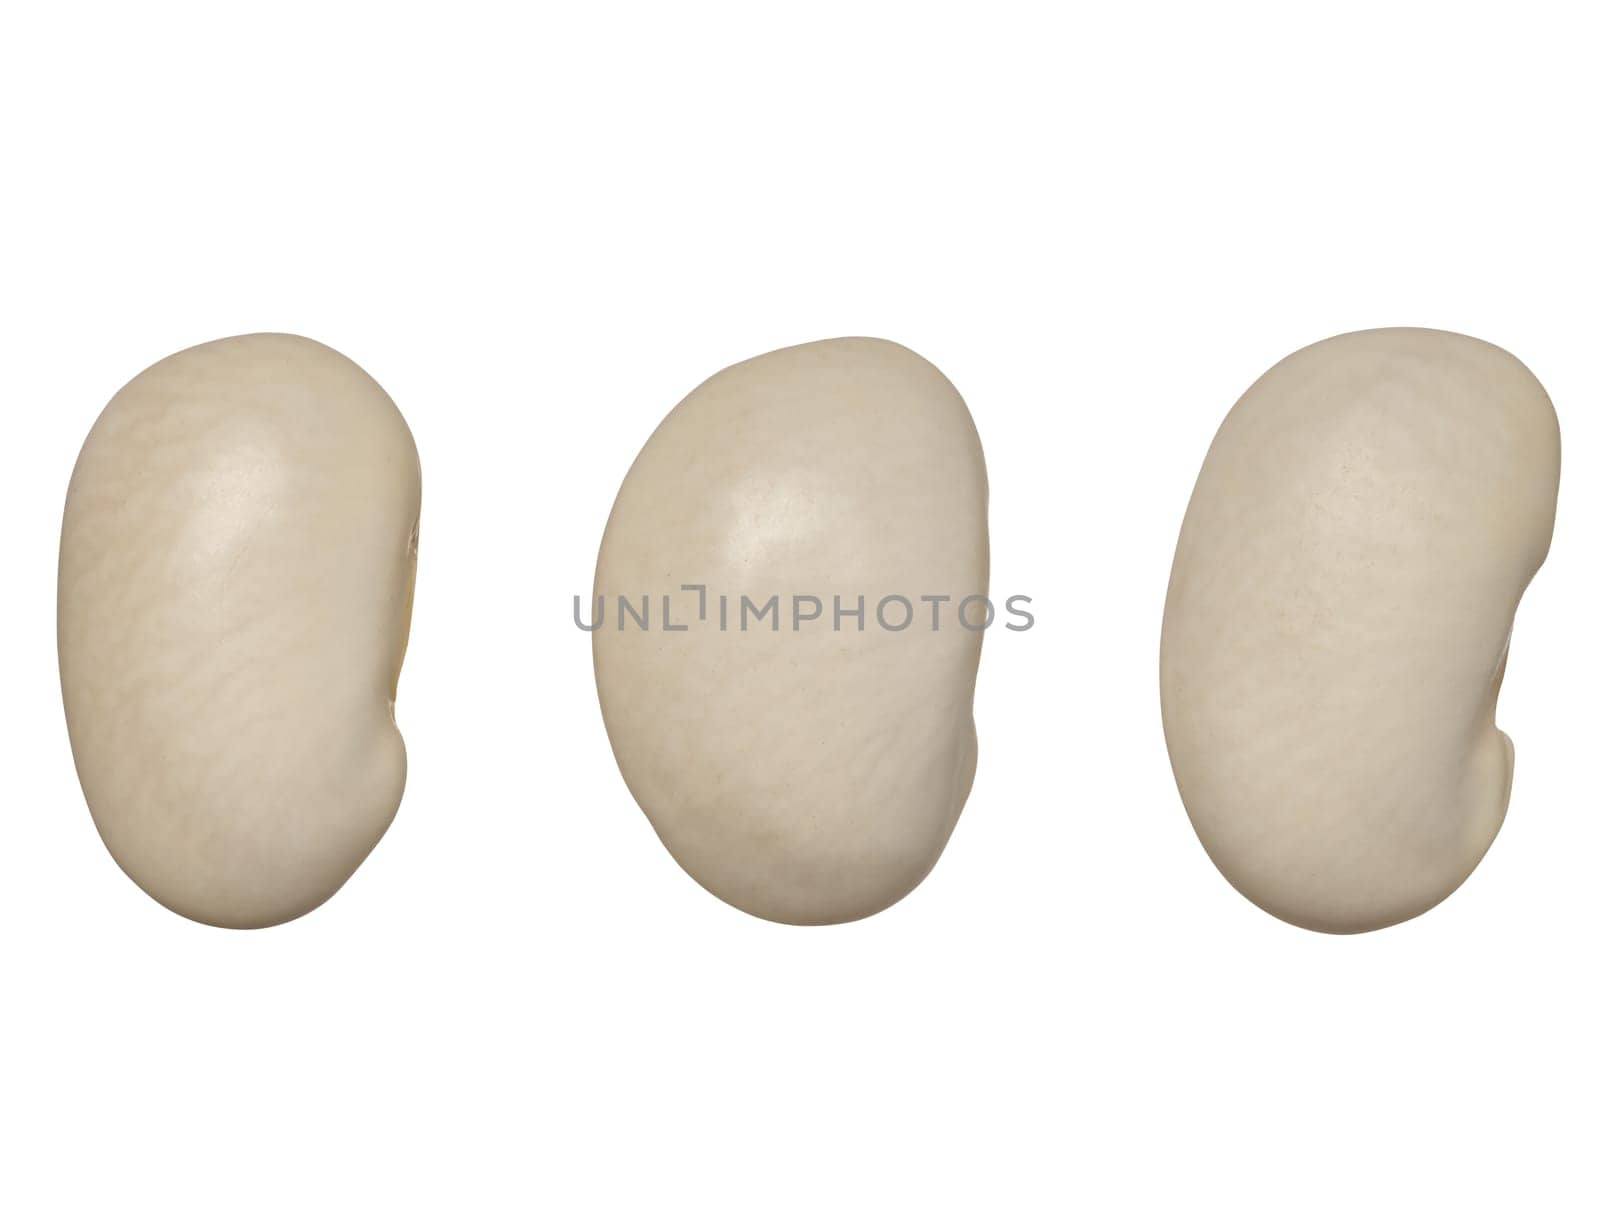 Raw white beans on isolated background, top view